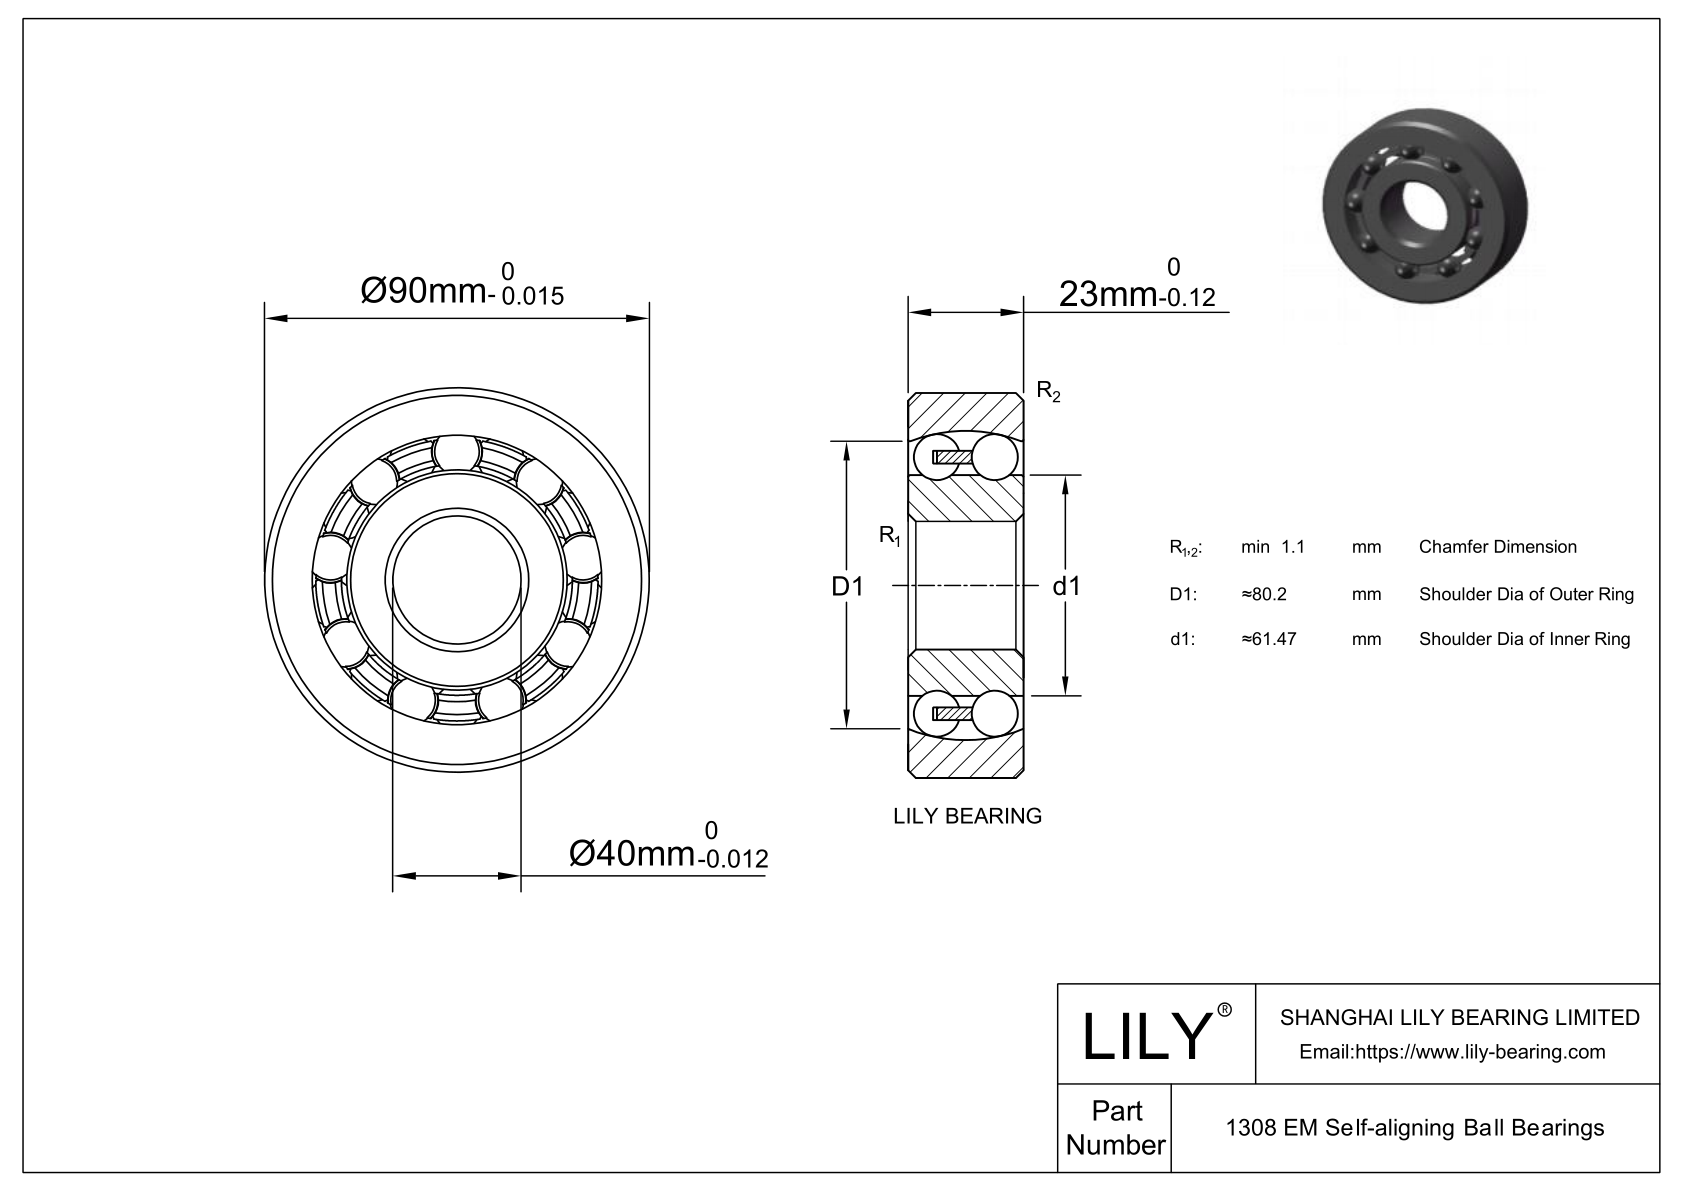 S1308 EM Stainless Steel Self Aligning Ball Bearings cad drawing